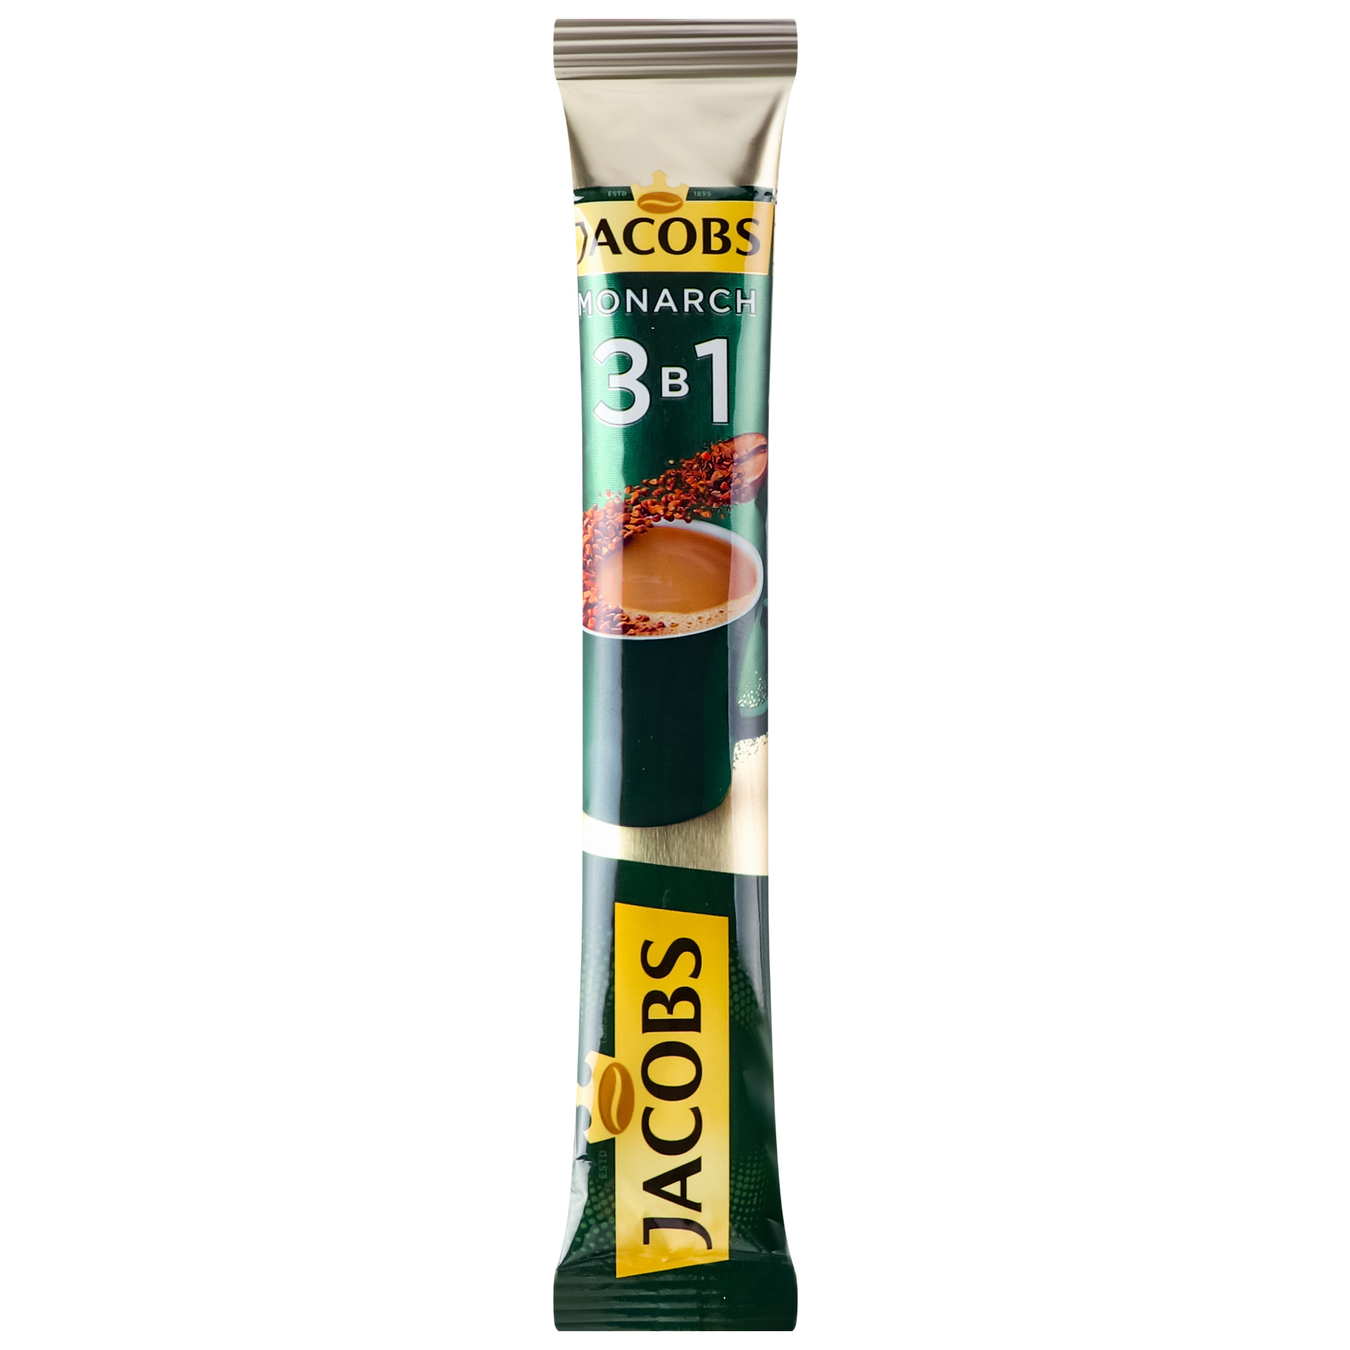 Jacobs Monarch 3in1 Instant Coffee Drink 15g